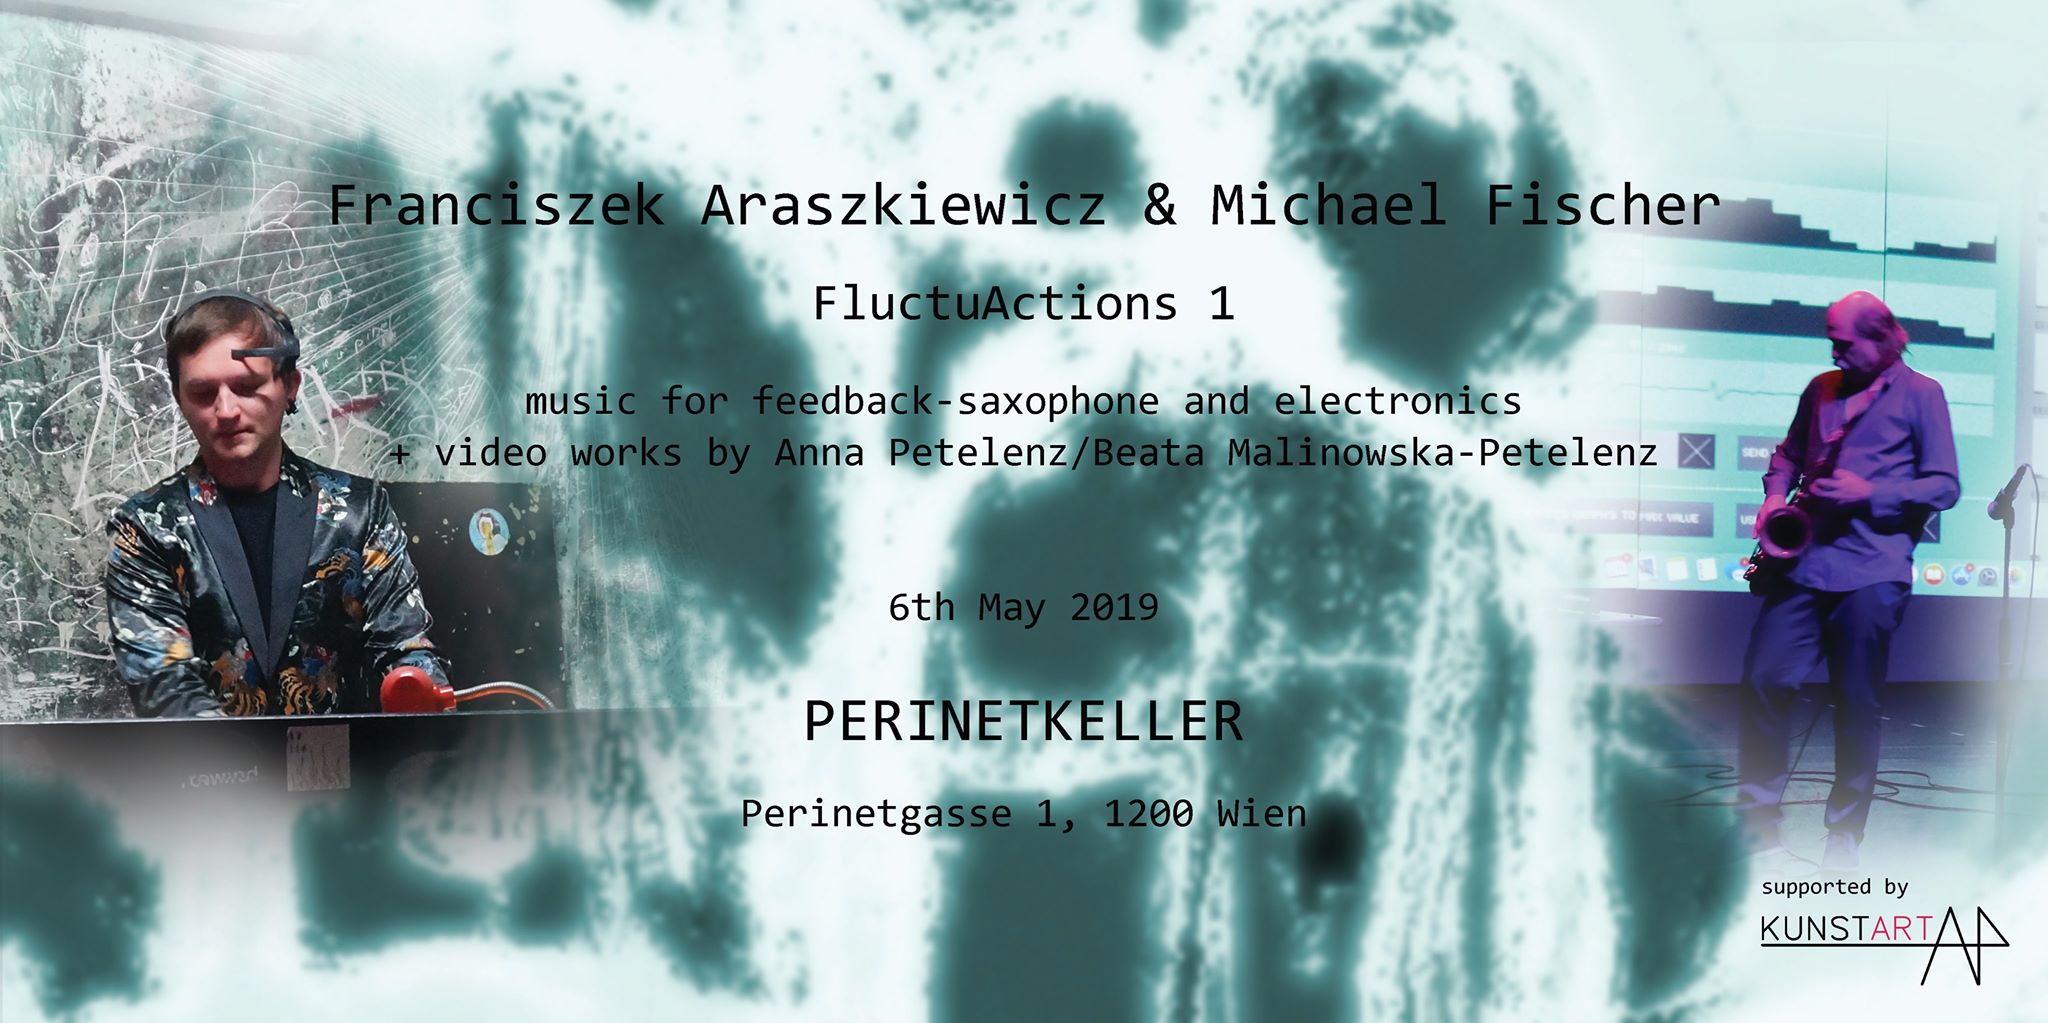 Fluctuations Perinetkeller